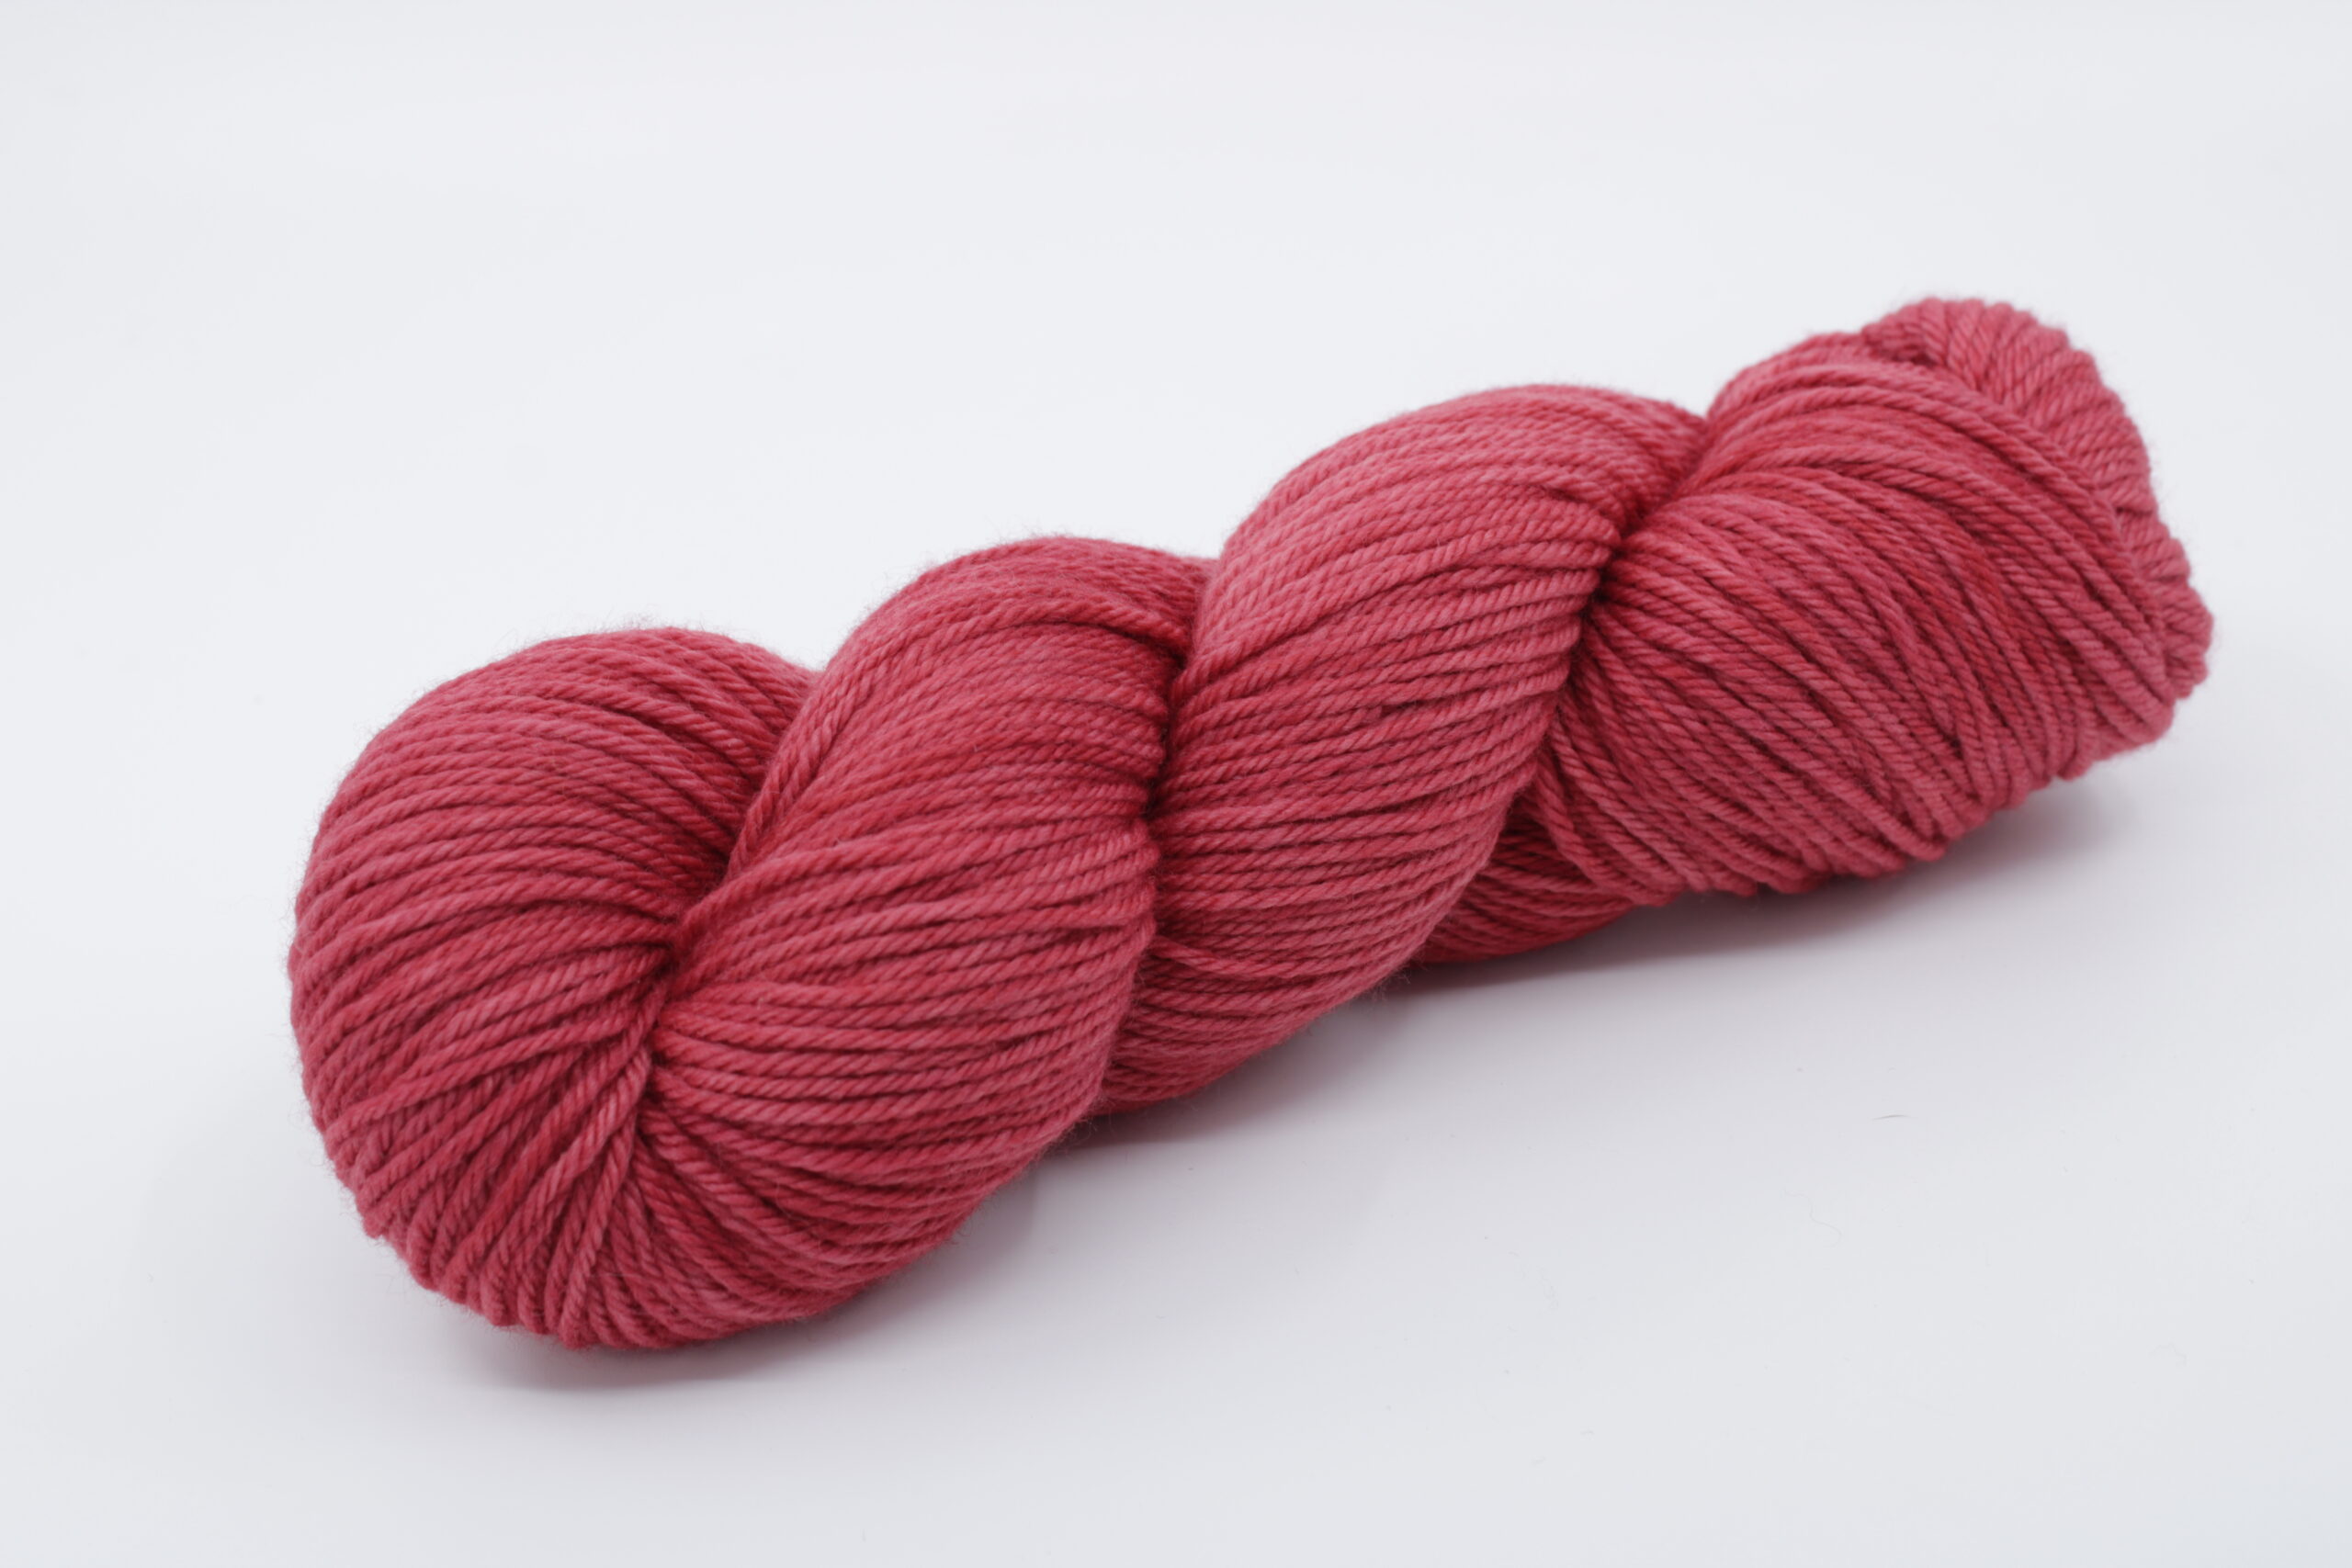 Fibrani wool, base: Flocon DK. Wool 100% merino untreated, red color. Color: Shani.